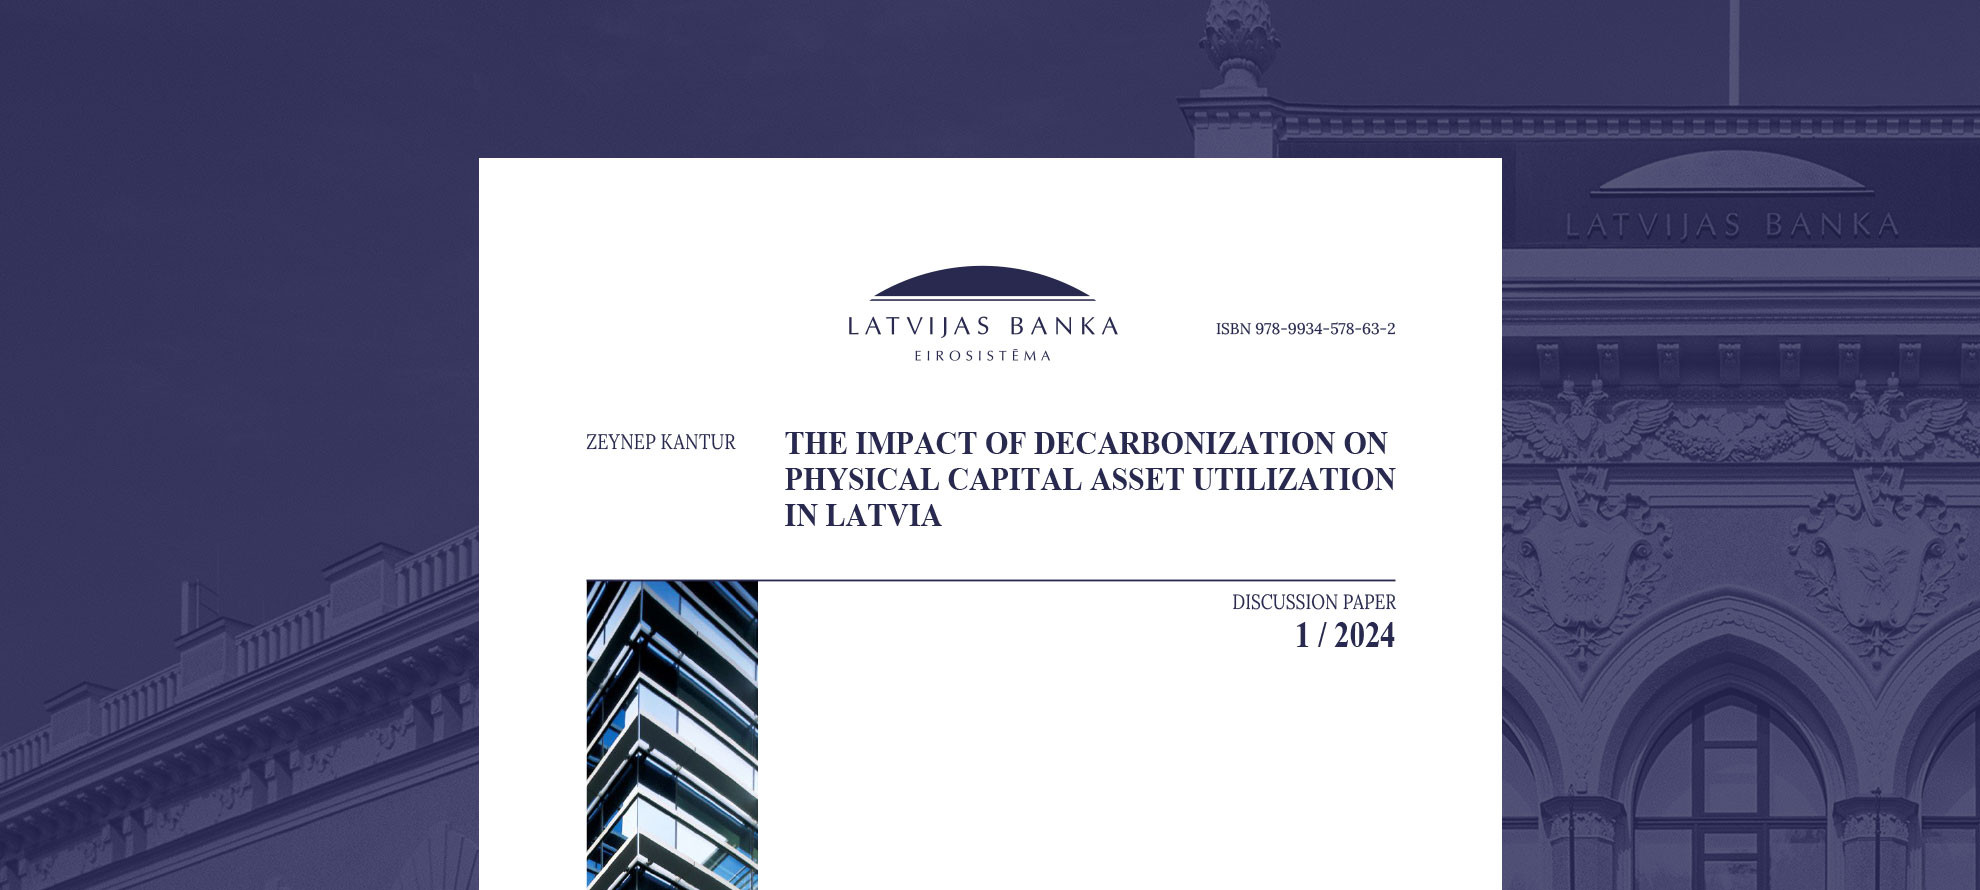 The Impact of Decarbonization on Physical Capital Asset Utilization in Latvia